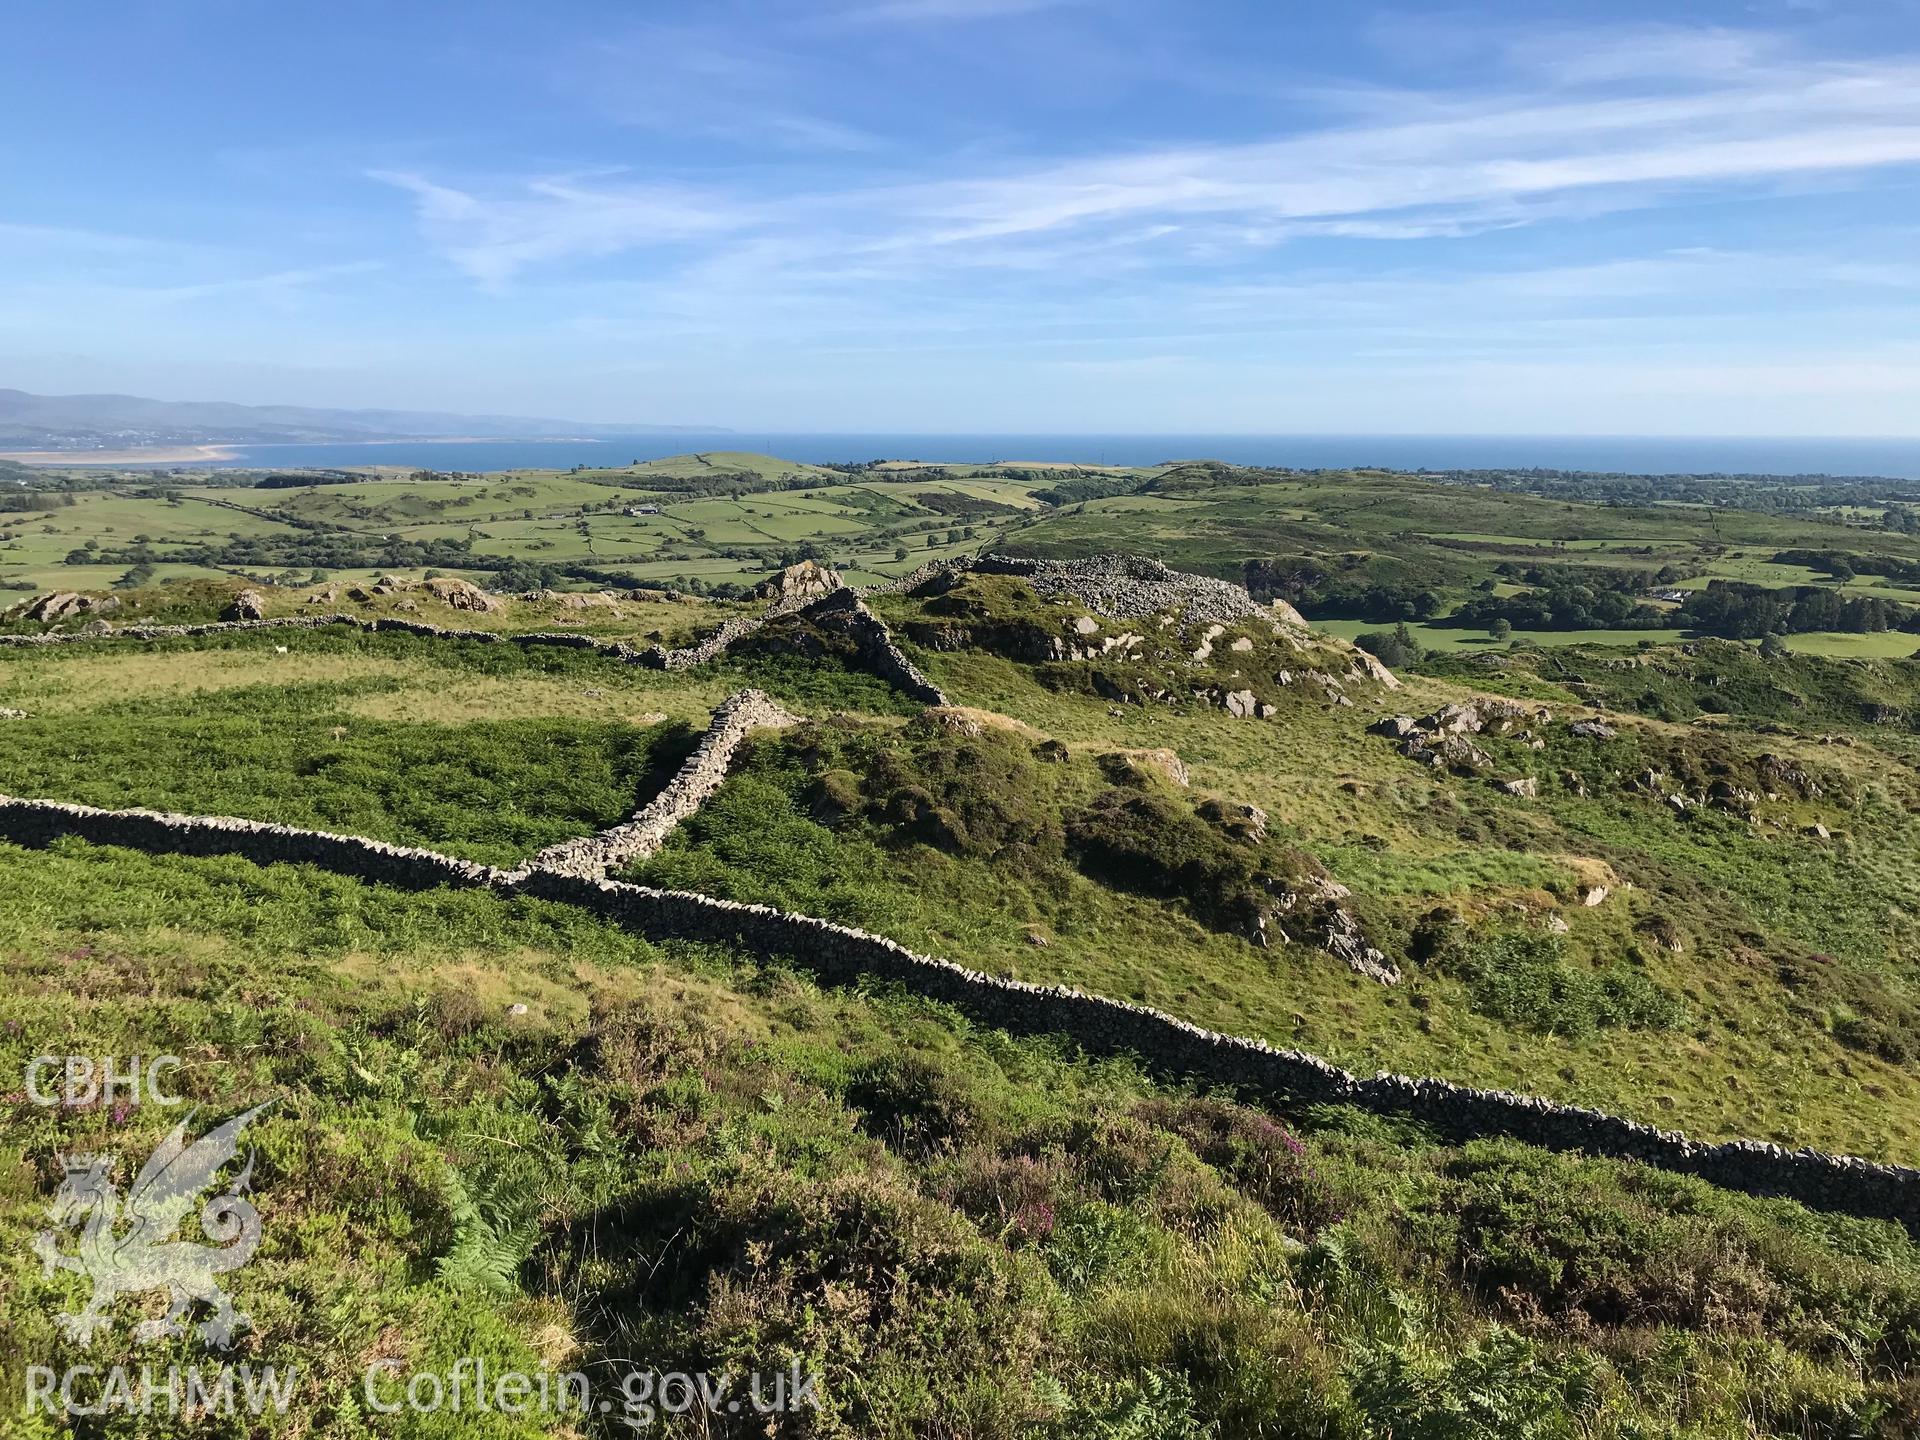 Colour photo showing view of Castell Caerau, Dolbenmaen, in it's setting, taken by Paul R. Davis, 22nd June 2018.